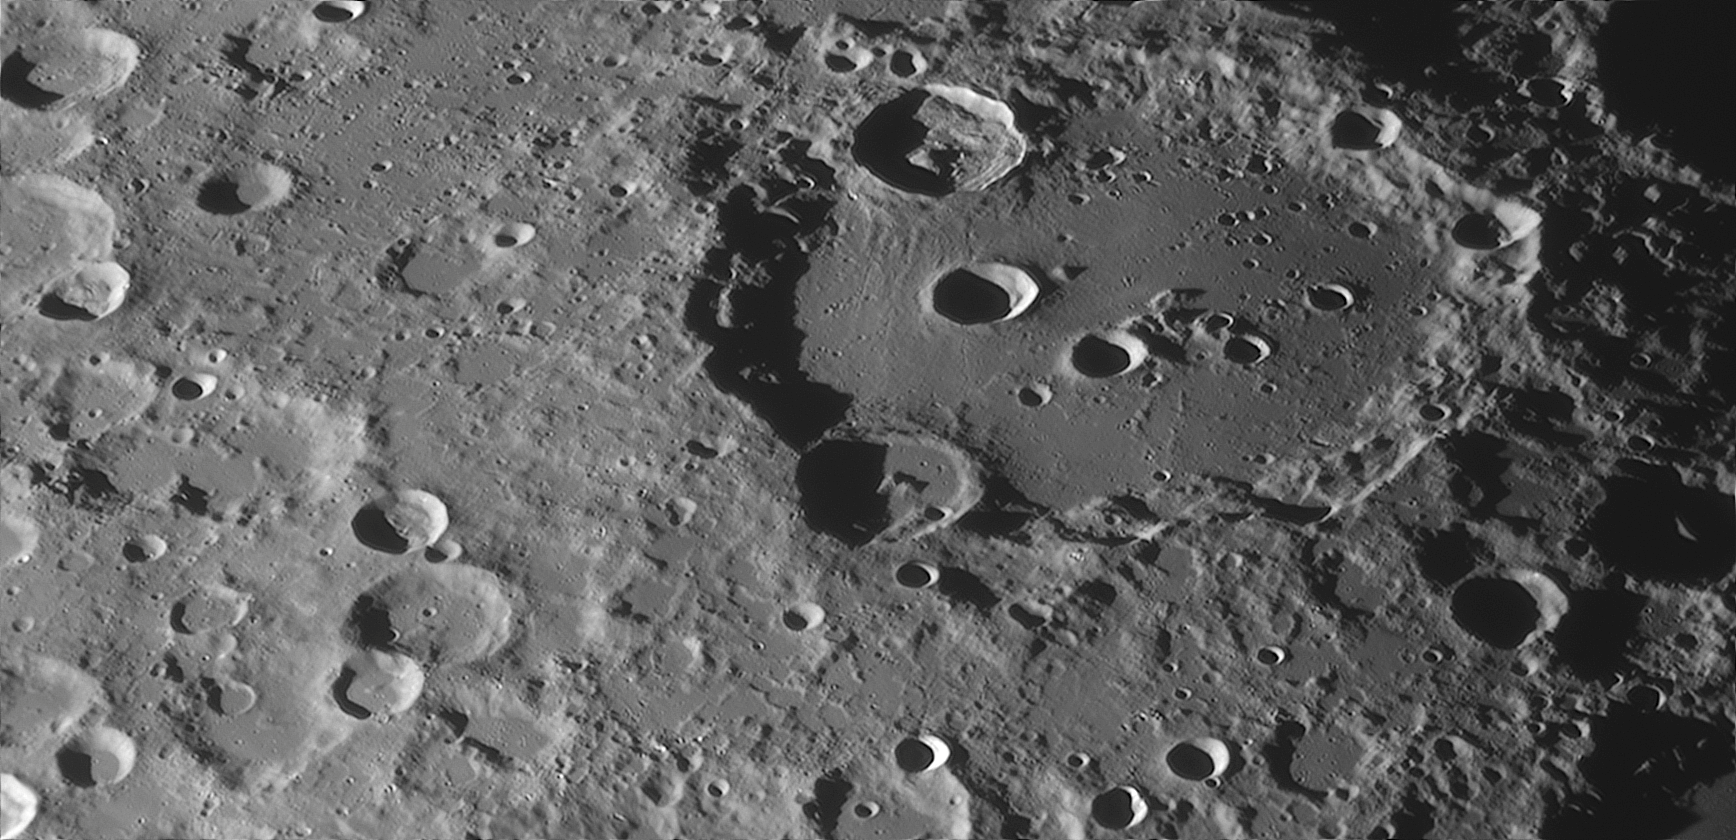 Clavius.png.3f45a6ae1ac7779b39fed55936a47ab8.png